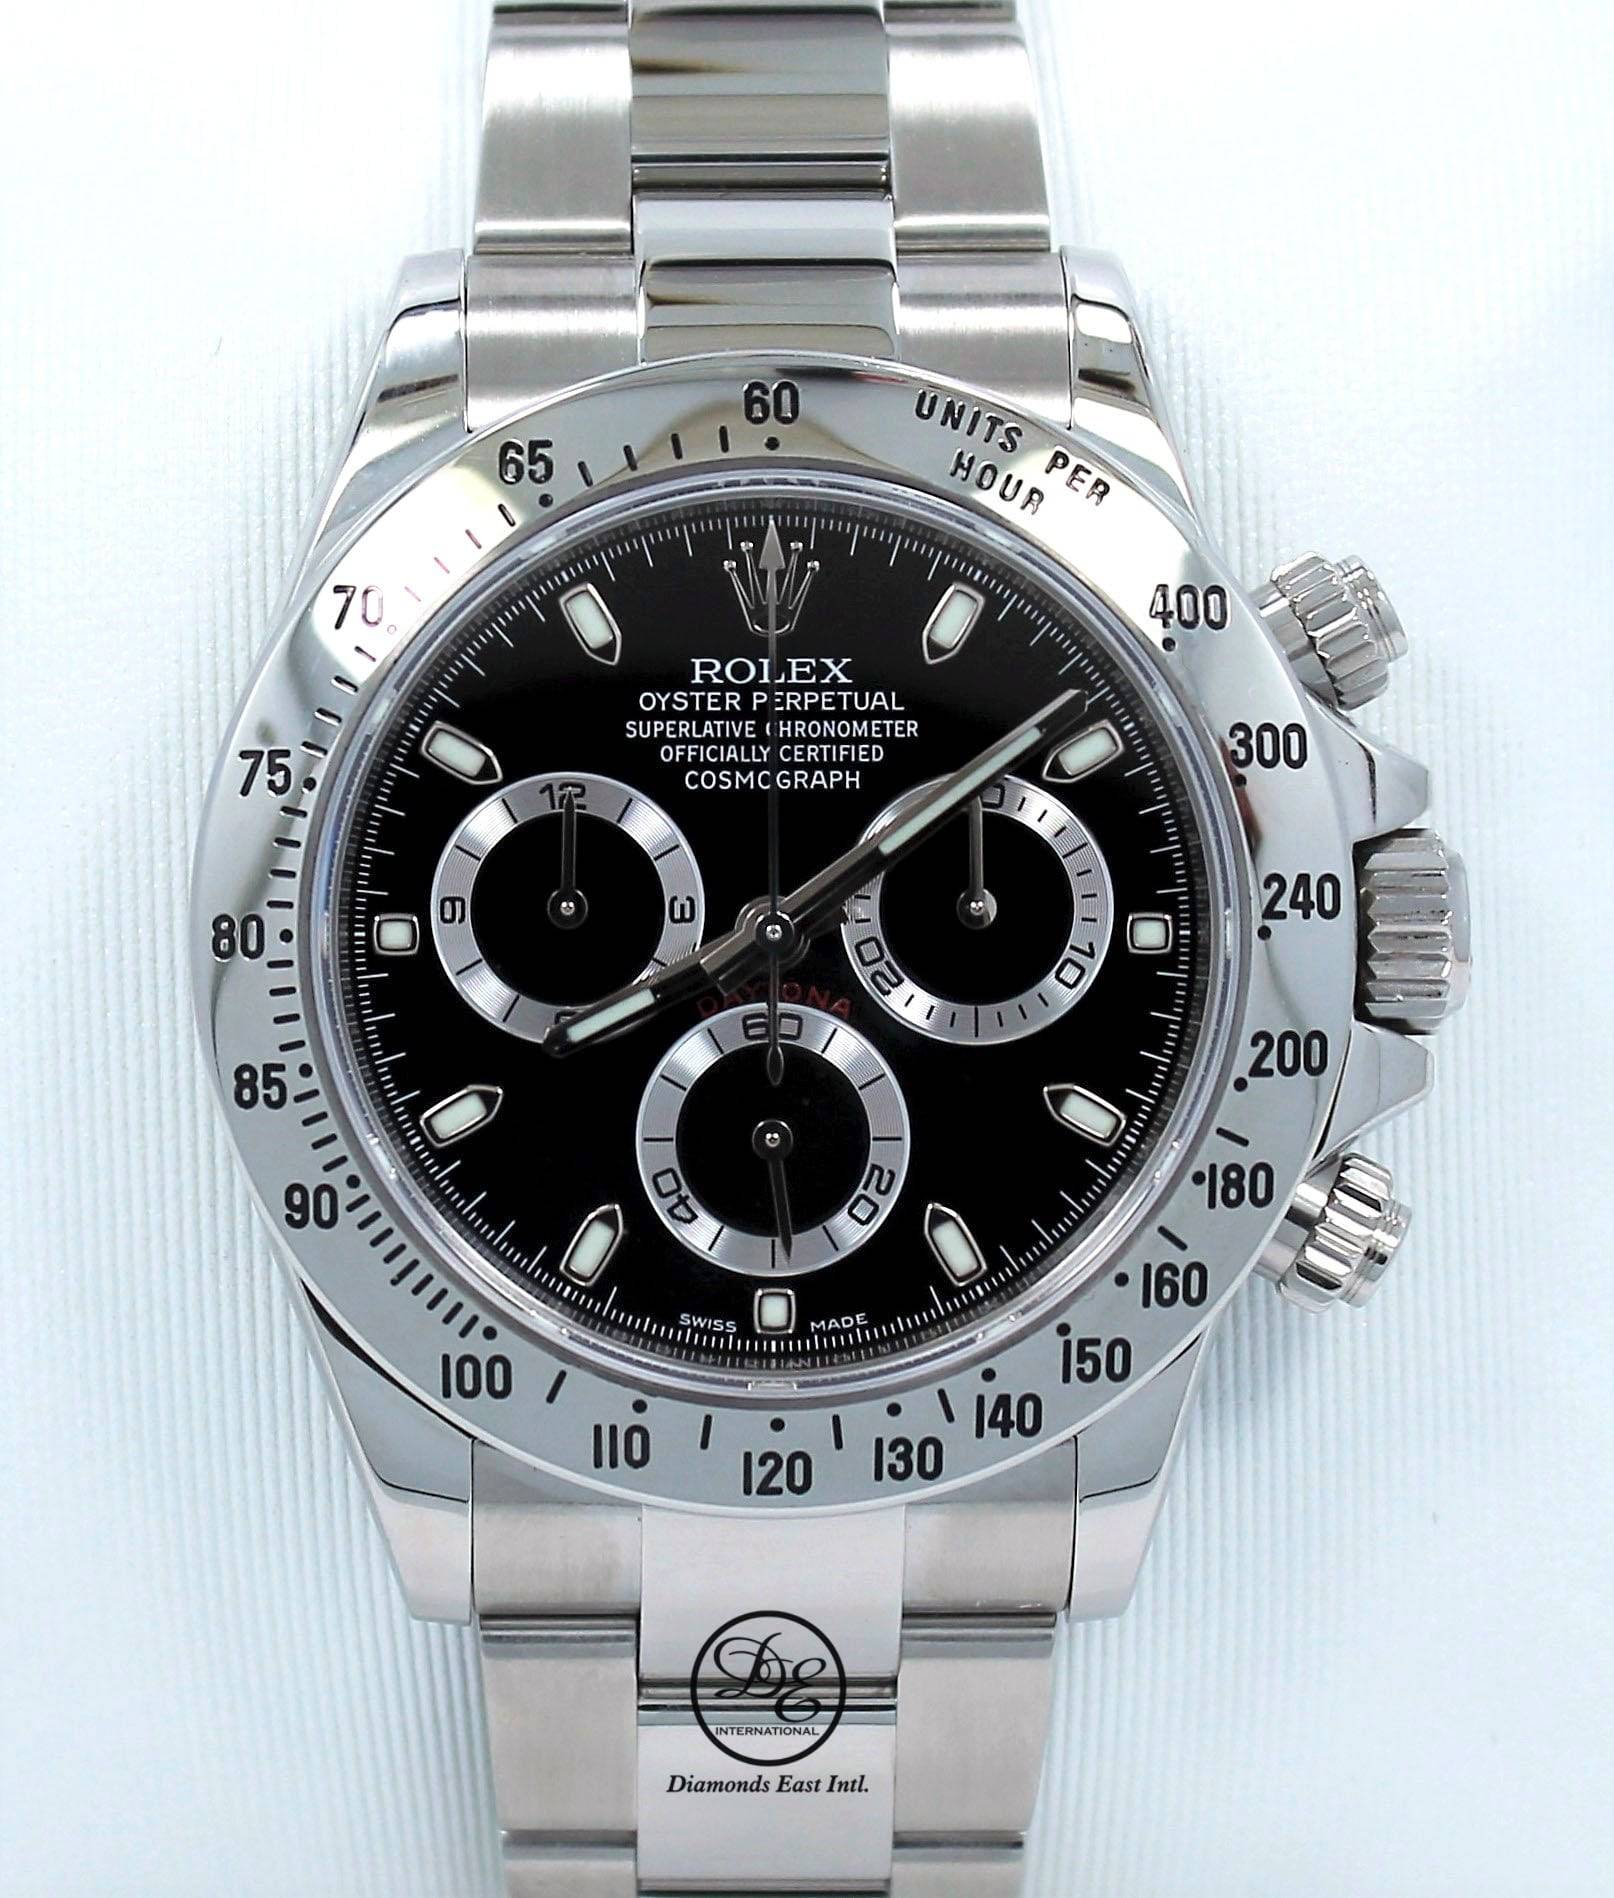 Rolex 116520 Stainless Steel Oyster Black Dial BOX/PAPERS MINT Diamonds East Intl.